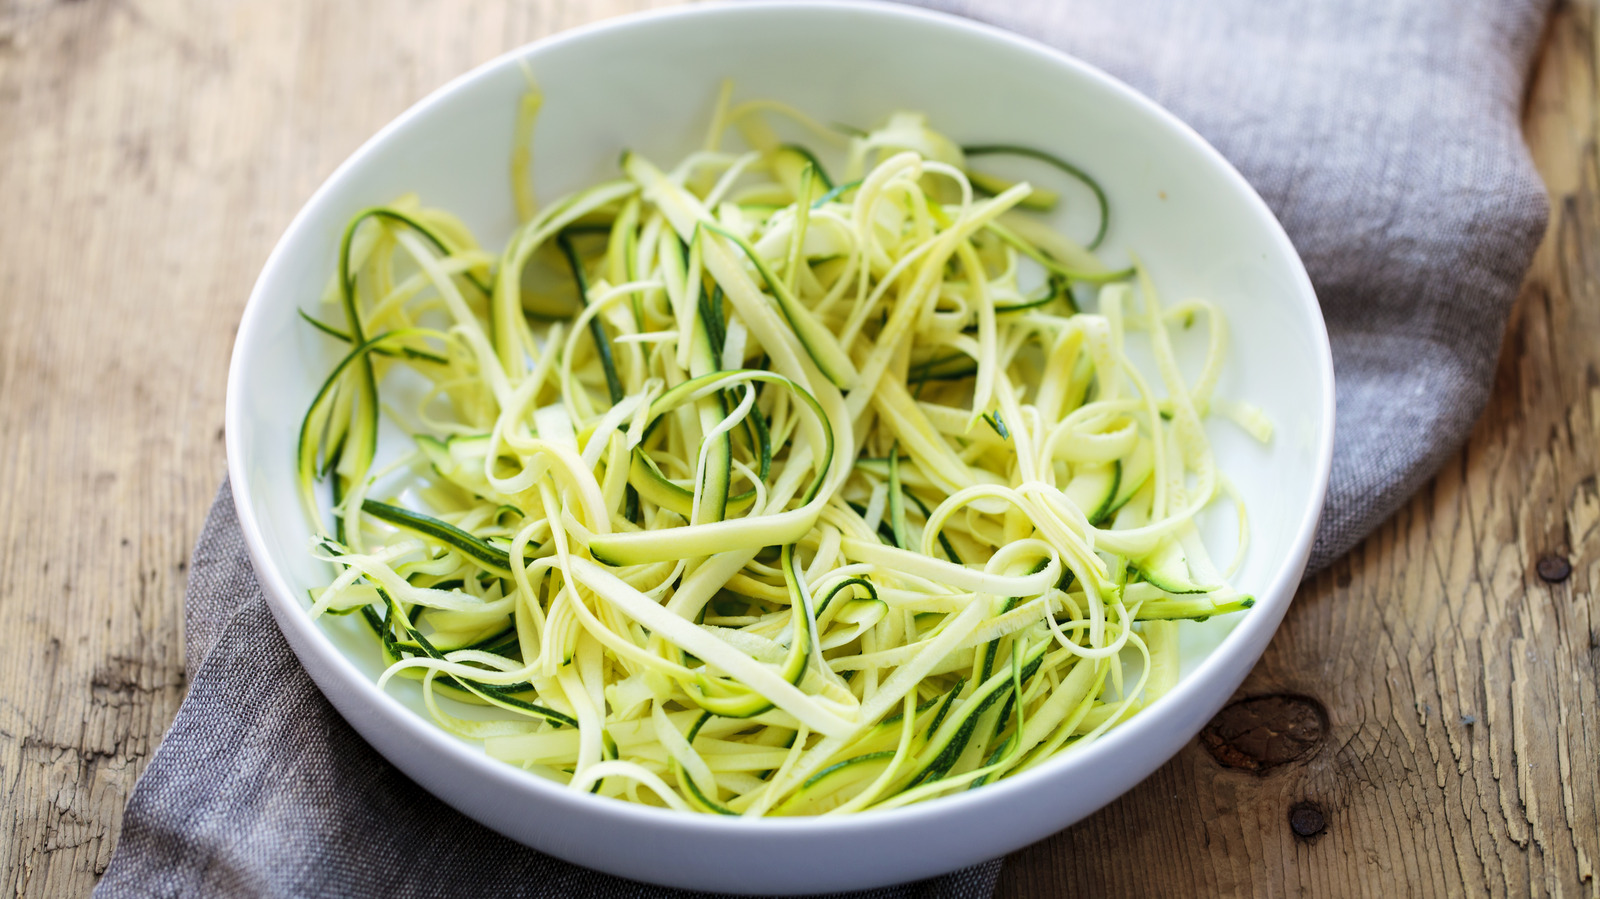 Zoodles: How to Cook and Avoid Watery, Soggy Zucchini Noodles